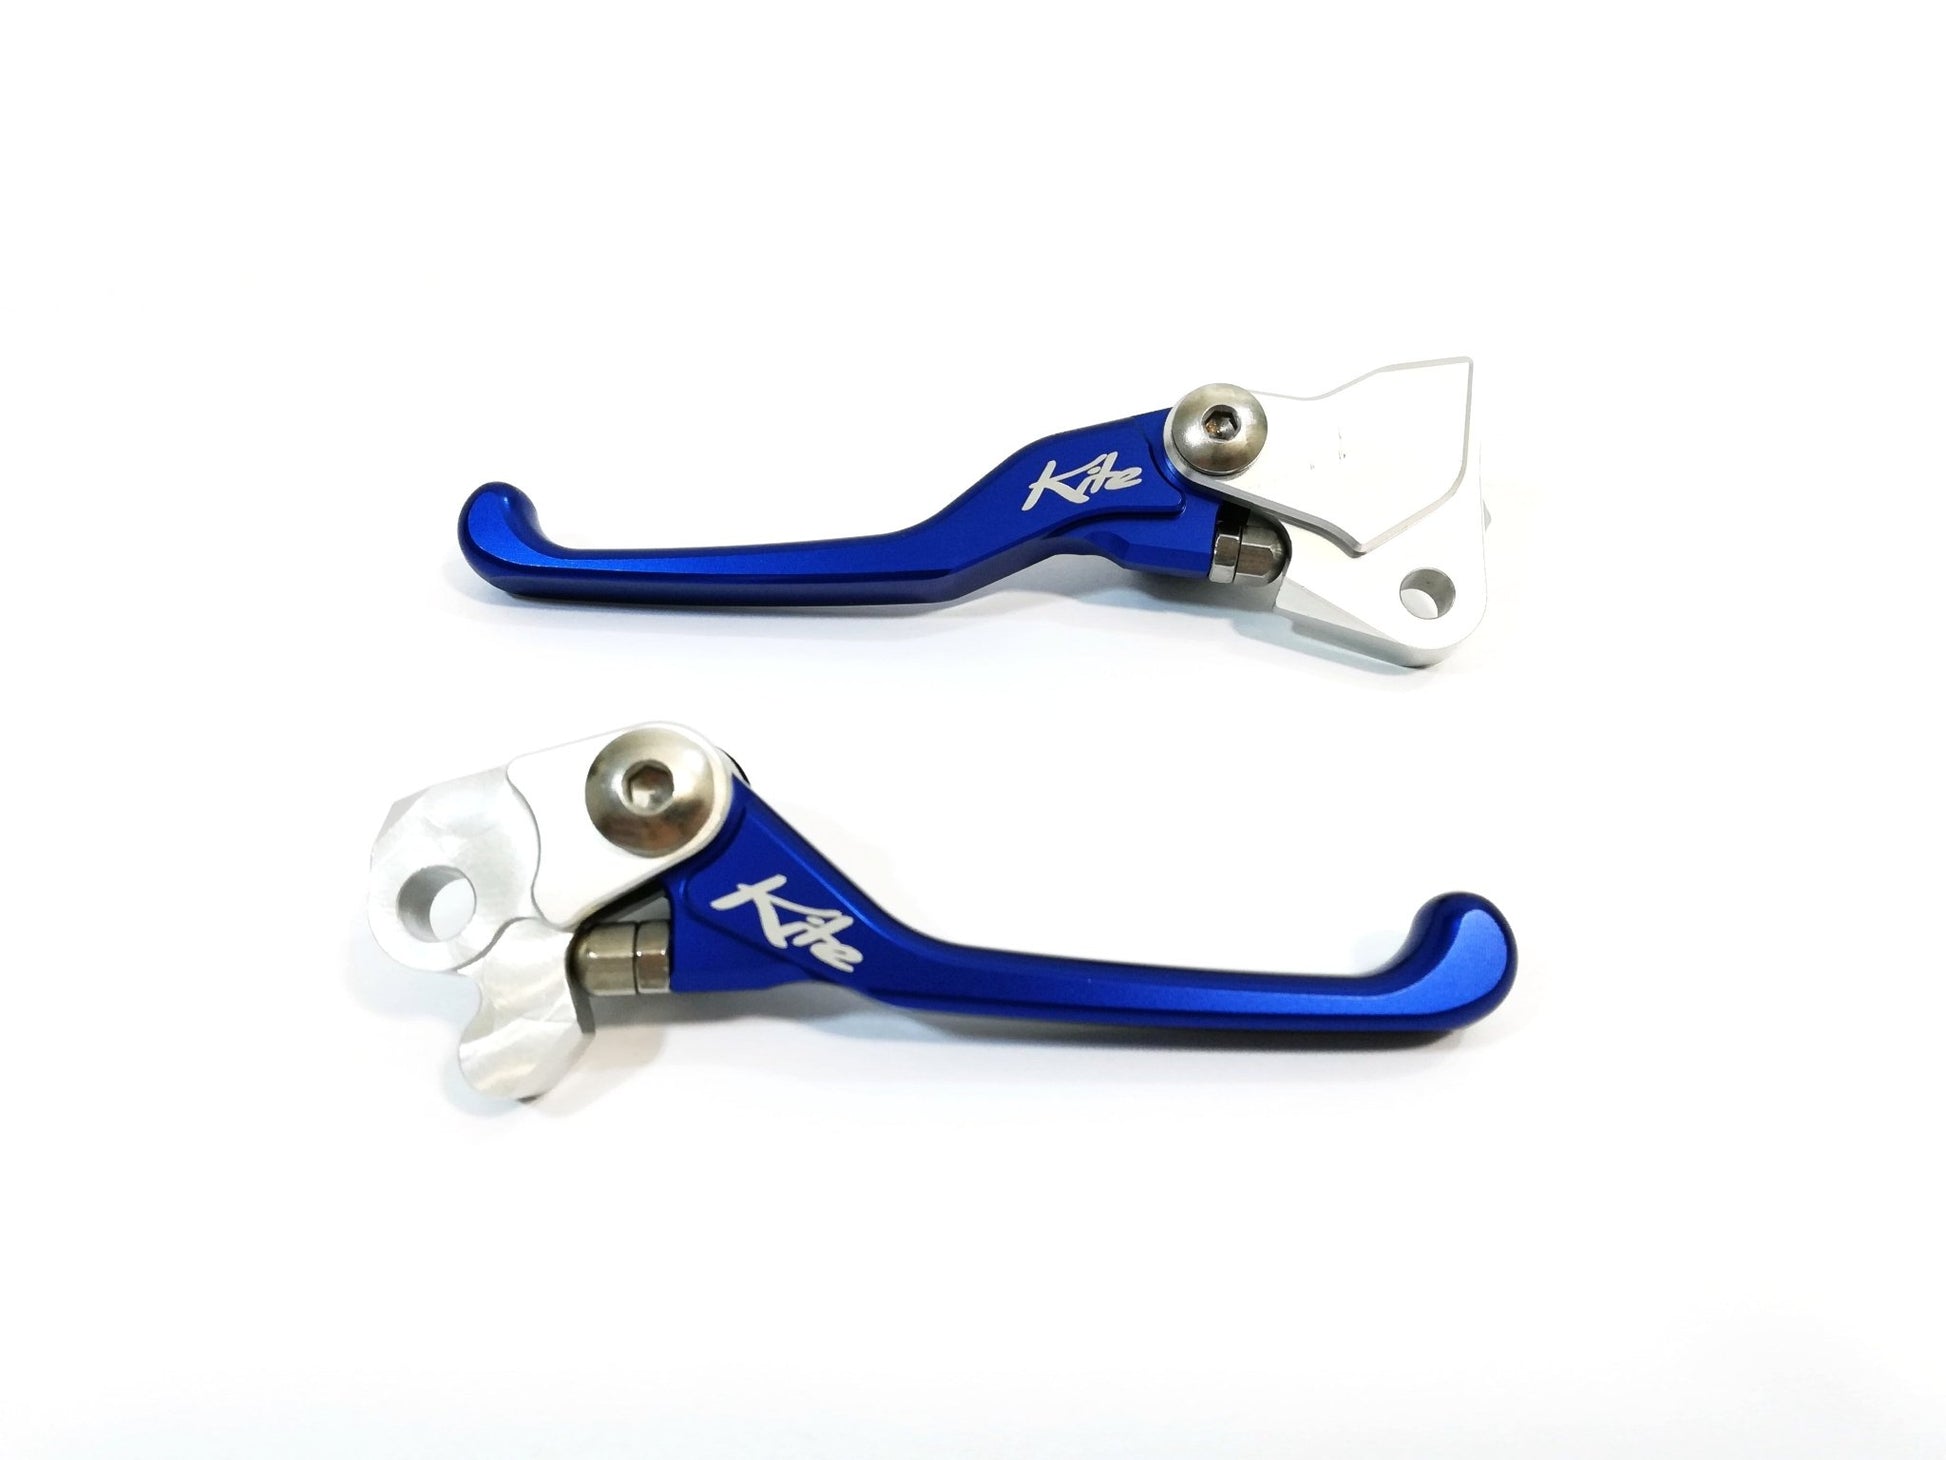 Kite Clutch And Brake Unbreakable Levers - Yamaha YZ125/YZ250/YZF250/YZF450 - Blue - Kite Parts